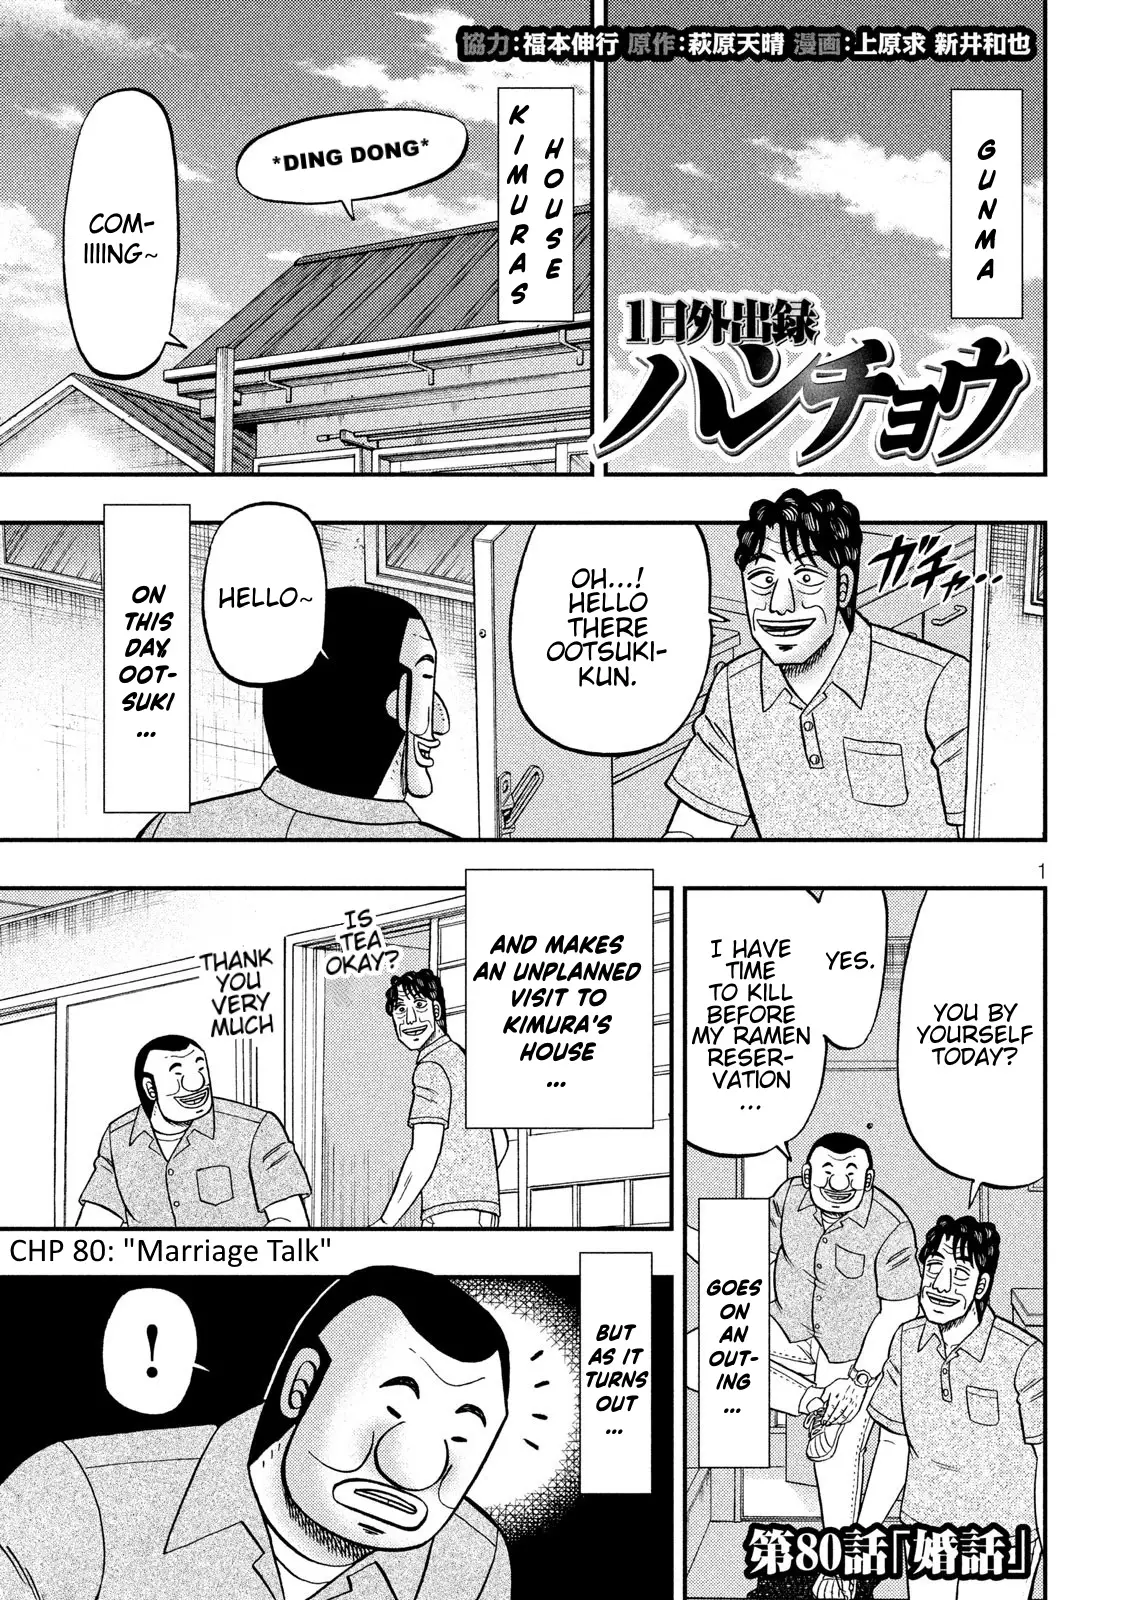 One Day Outing Foreman - 80 page 1-fe56b15b